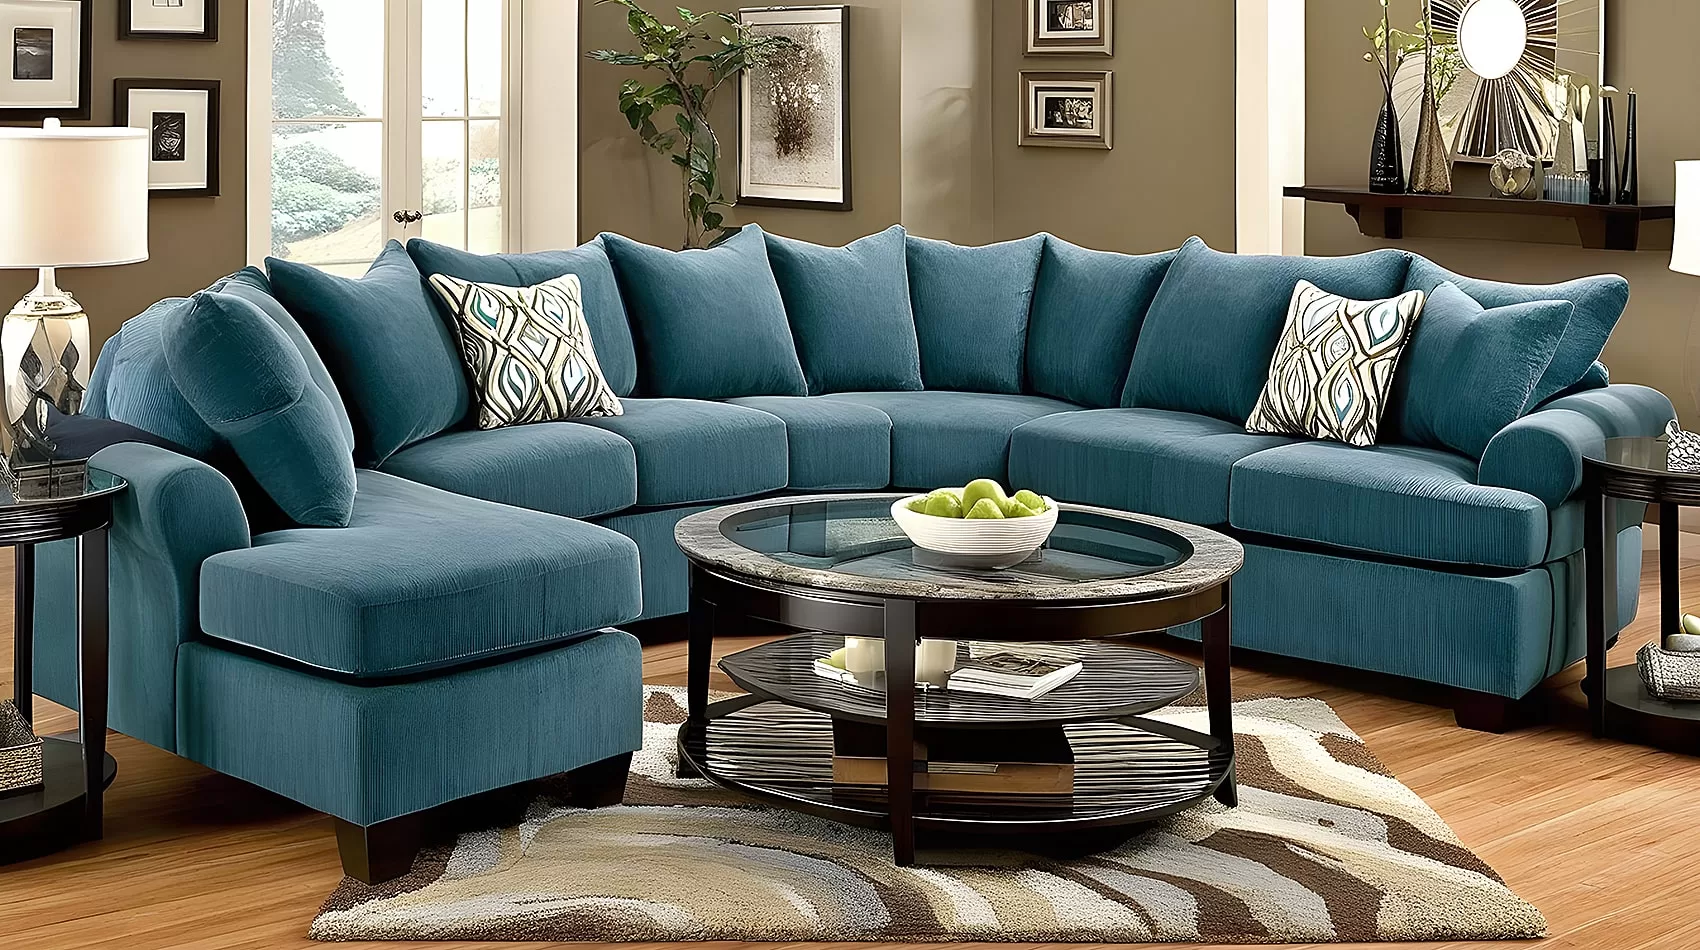 Blue Couch Sectional | Blue Sofa Sectional